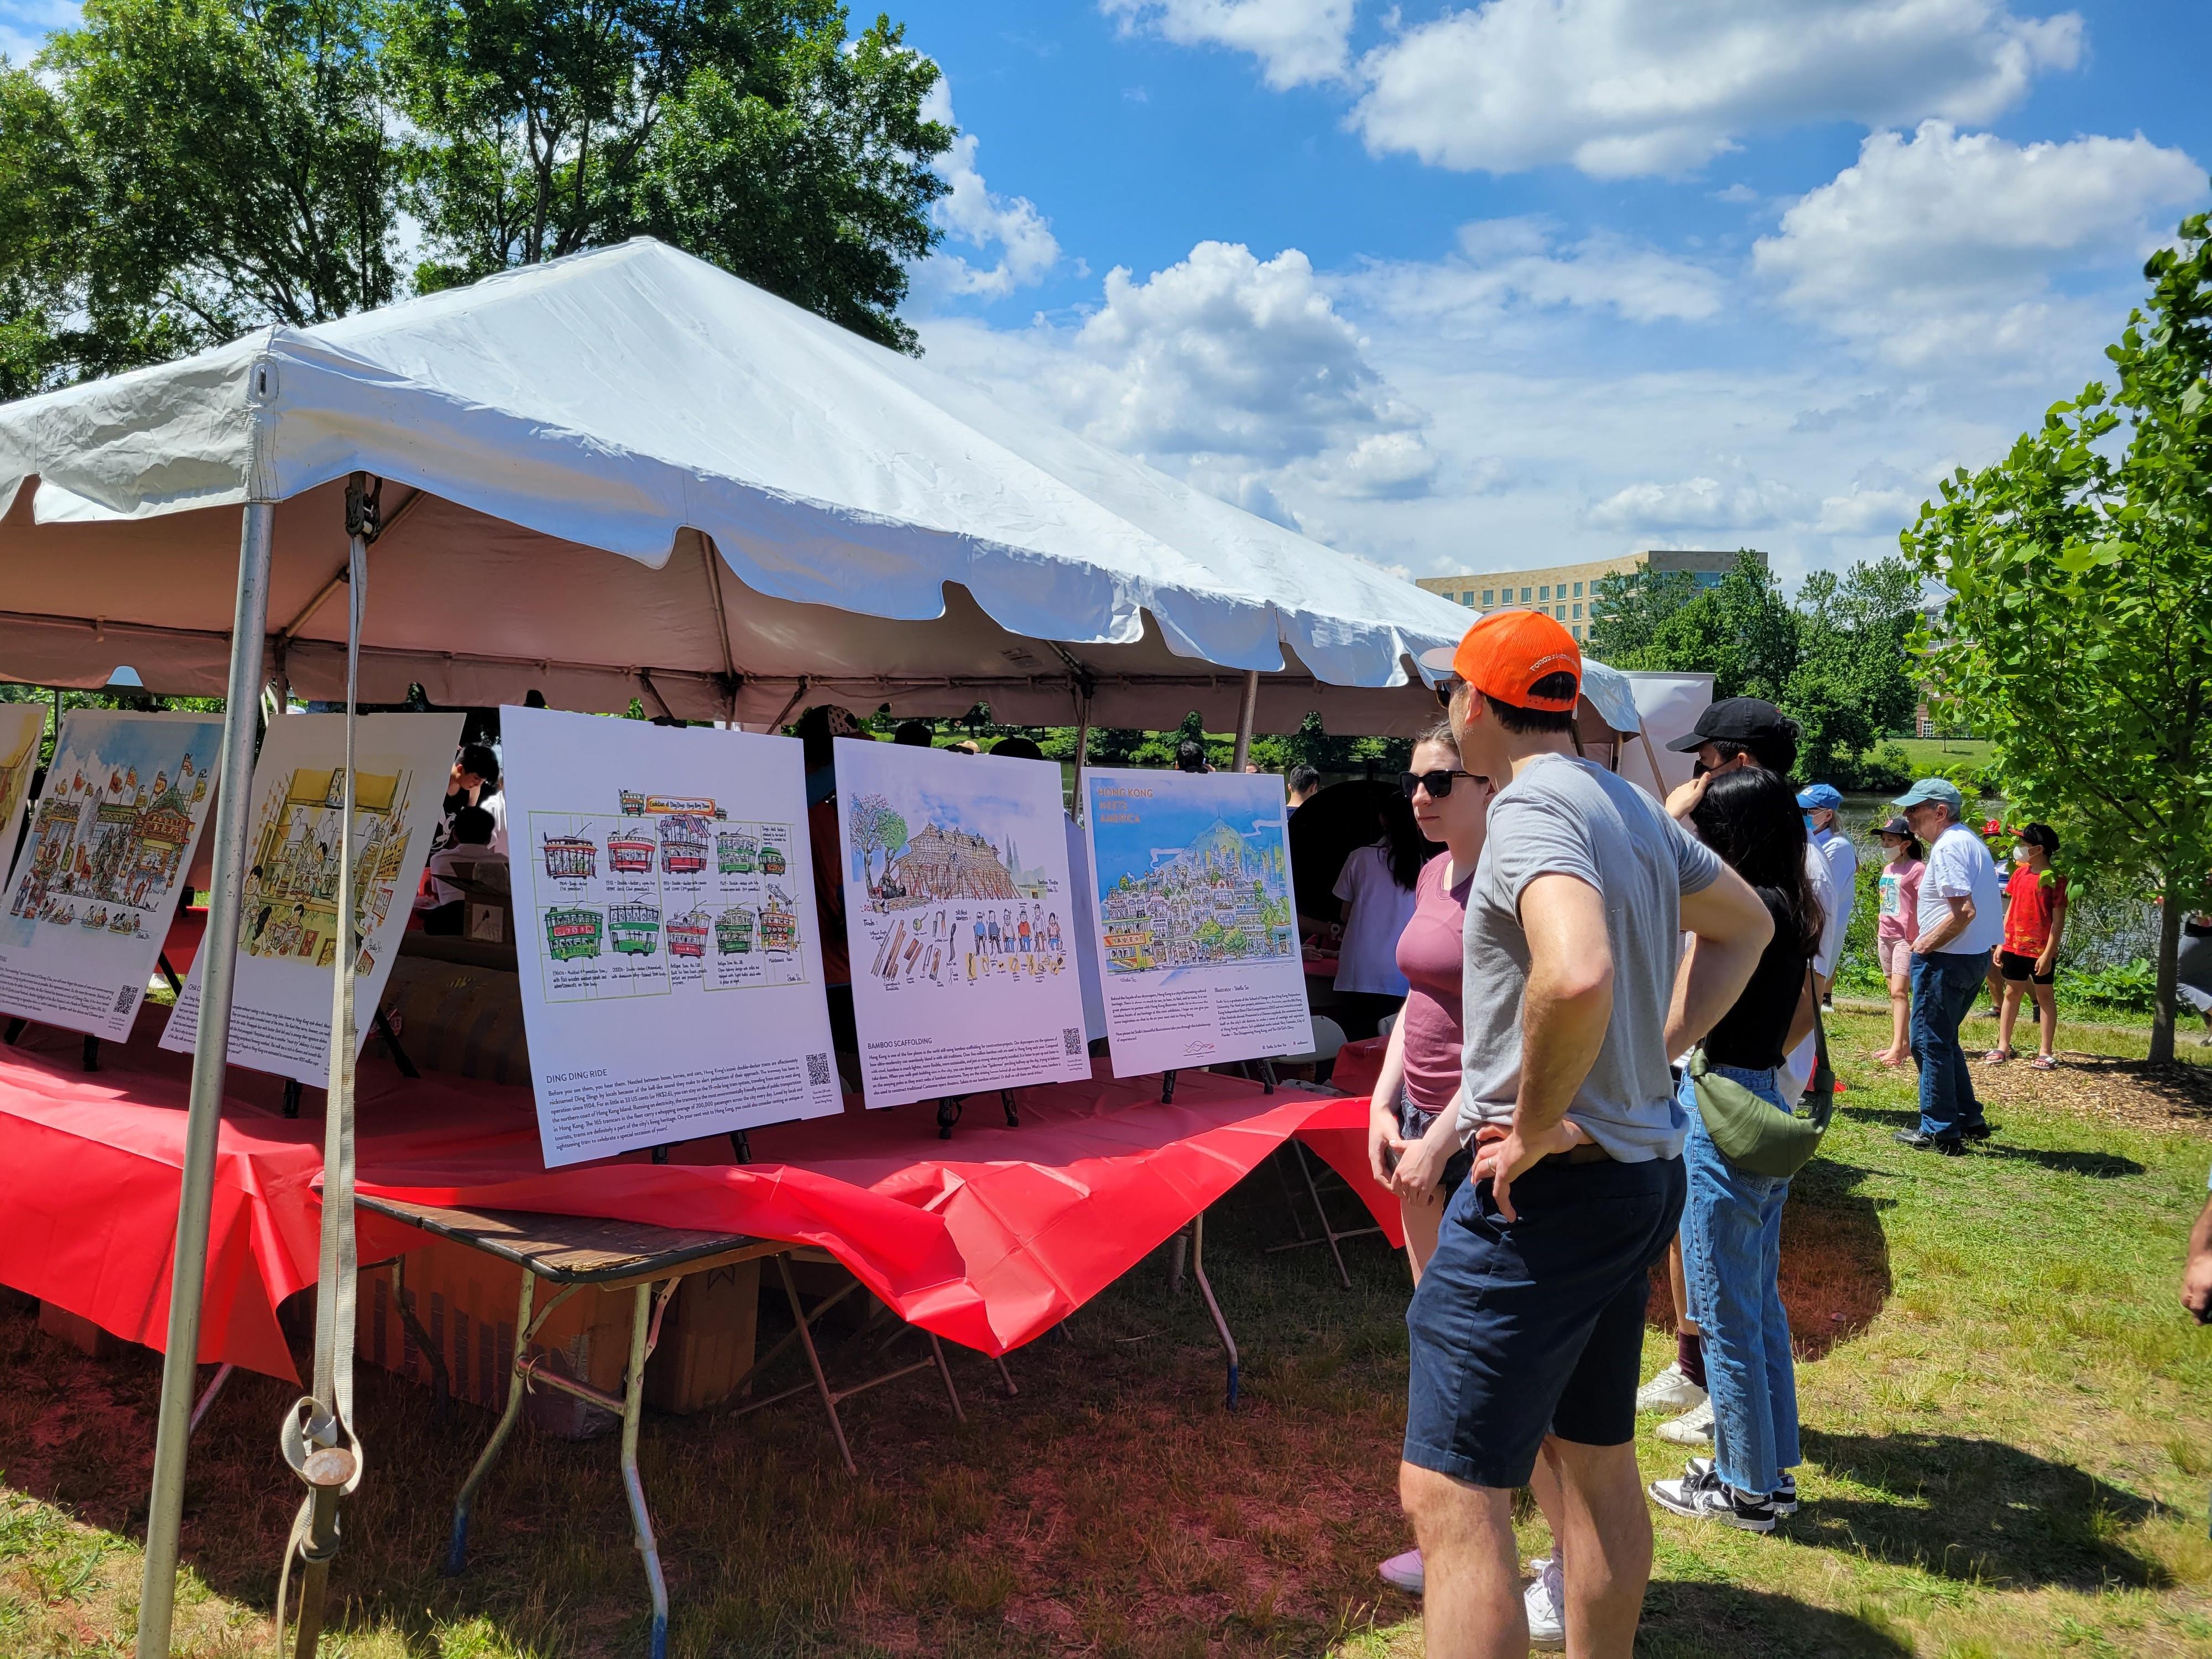 The Hong Kong Economic and Trade Office in New York staged a mini-exhibition at the Boston Hong Kong Dragon Boat Festival, showcasing the intangible cultural heritage of Hong Kong.